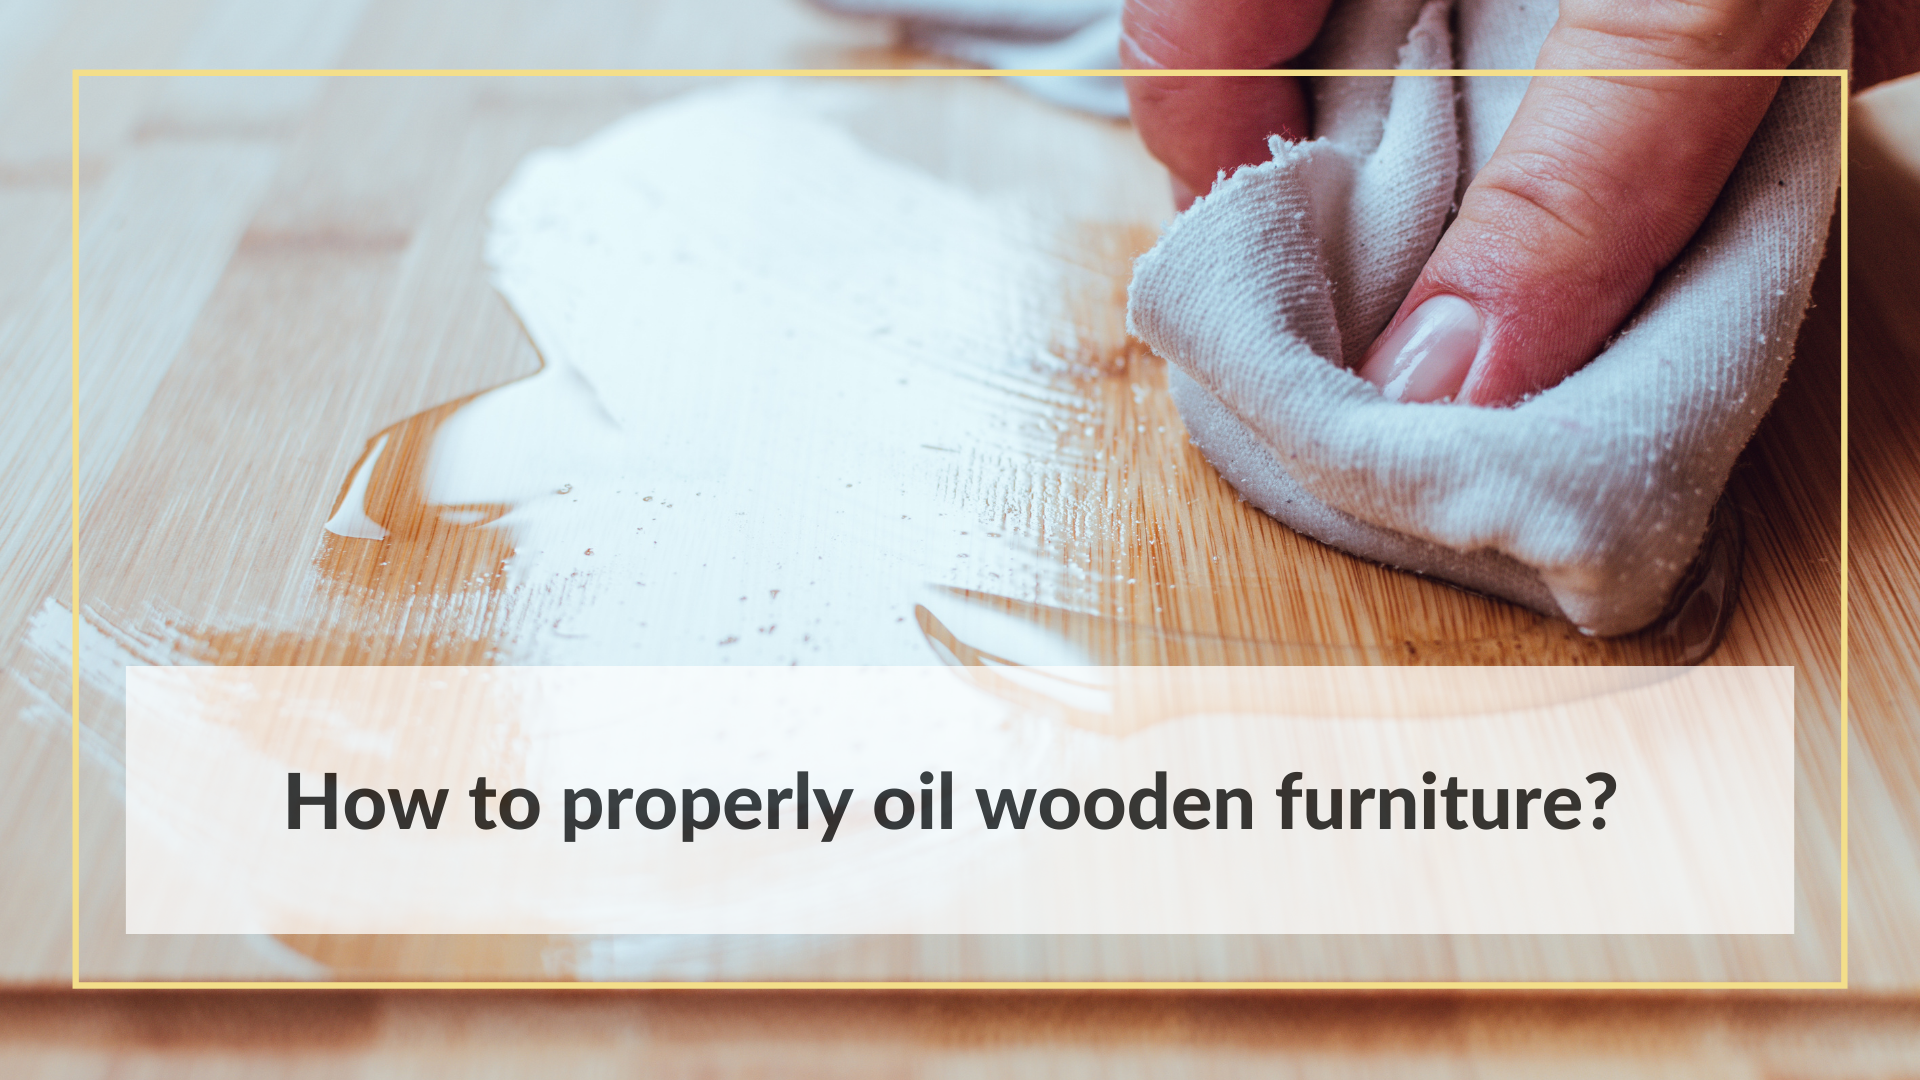 How to properly oil wooden furniture